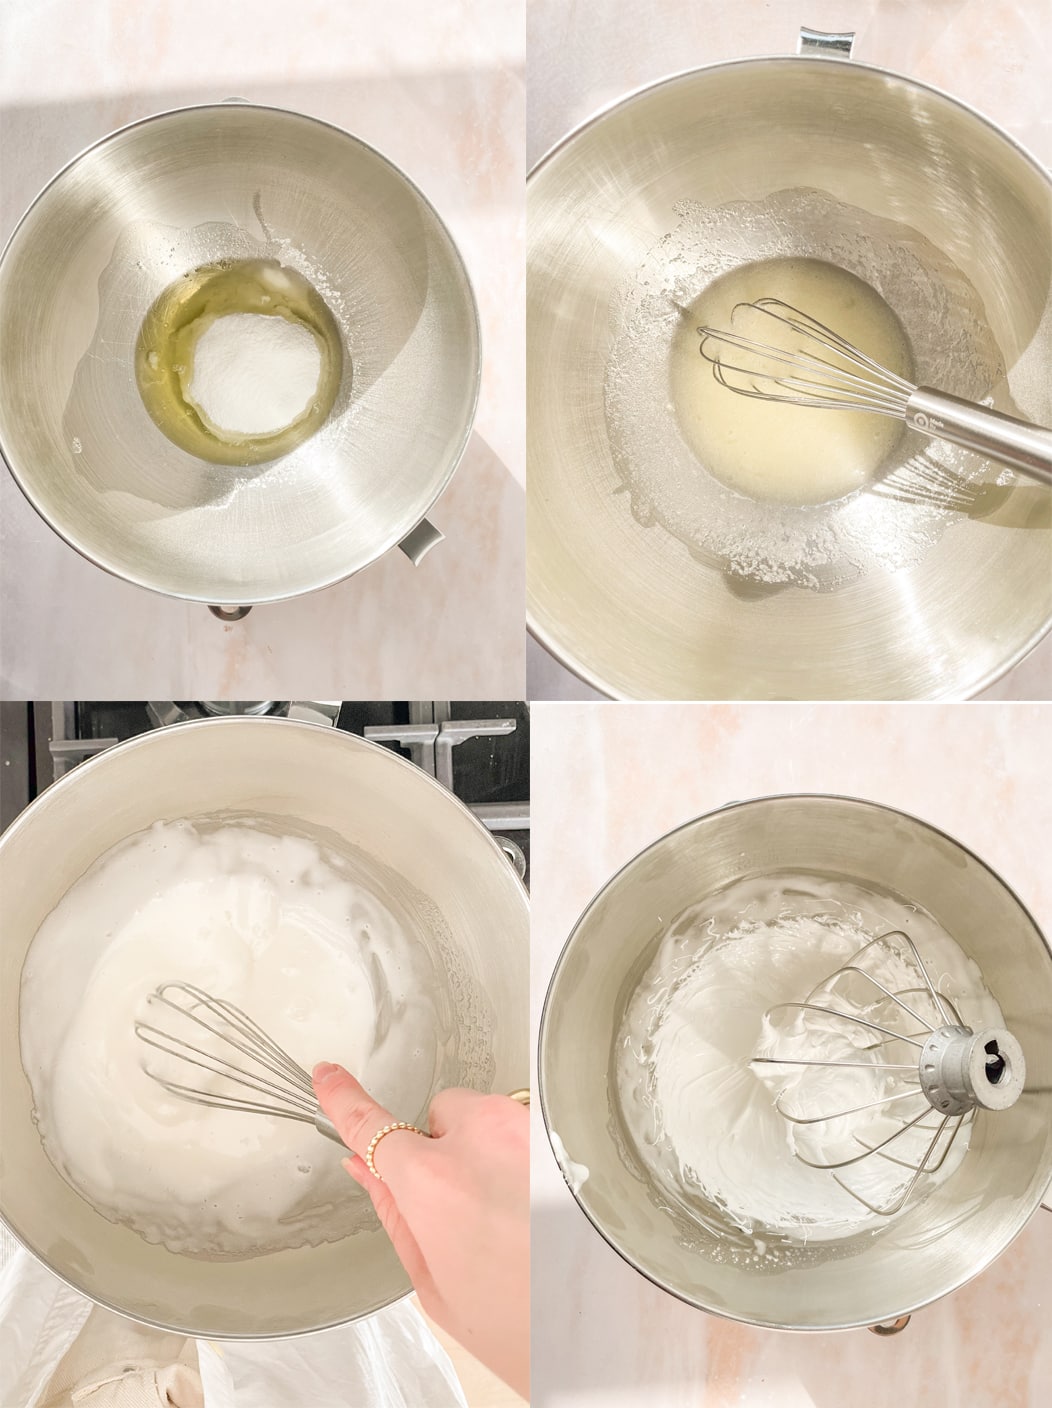 Process of cooking and whipping the meringue.